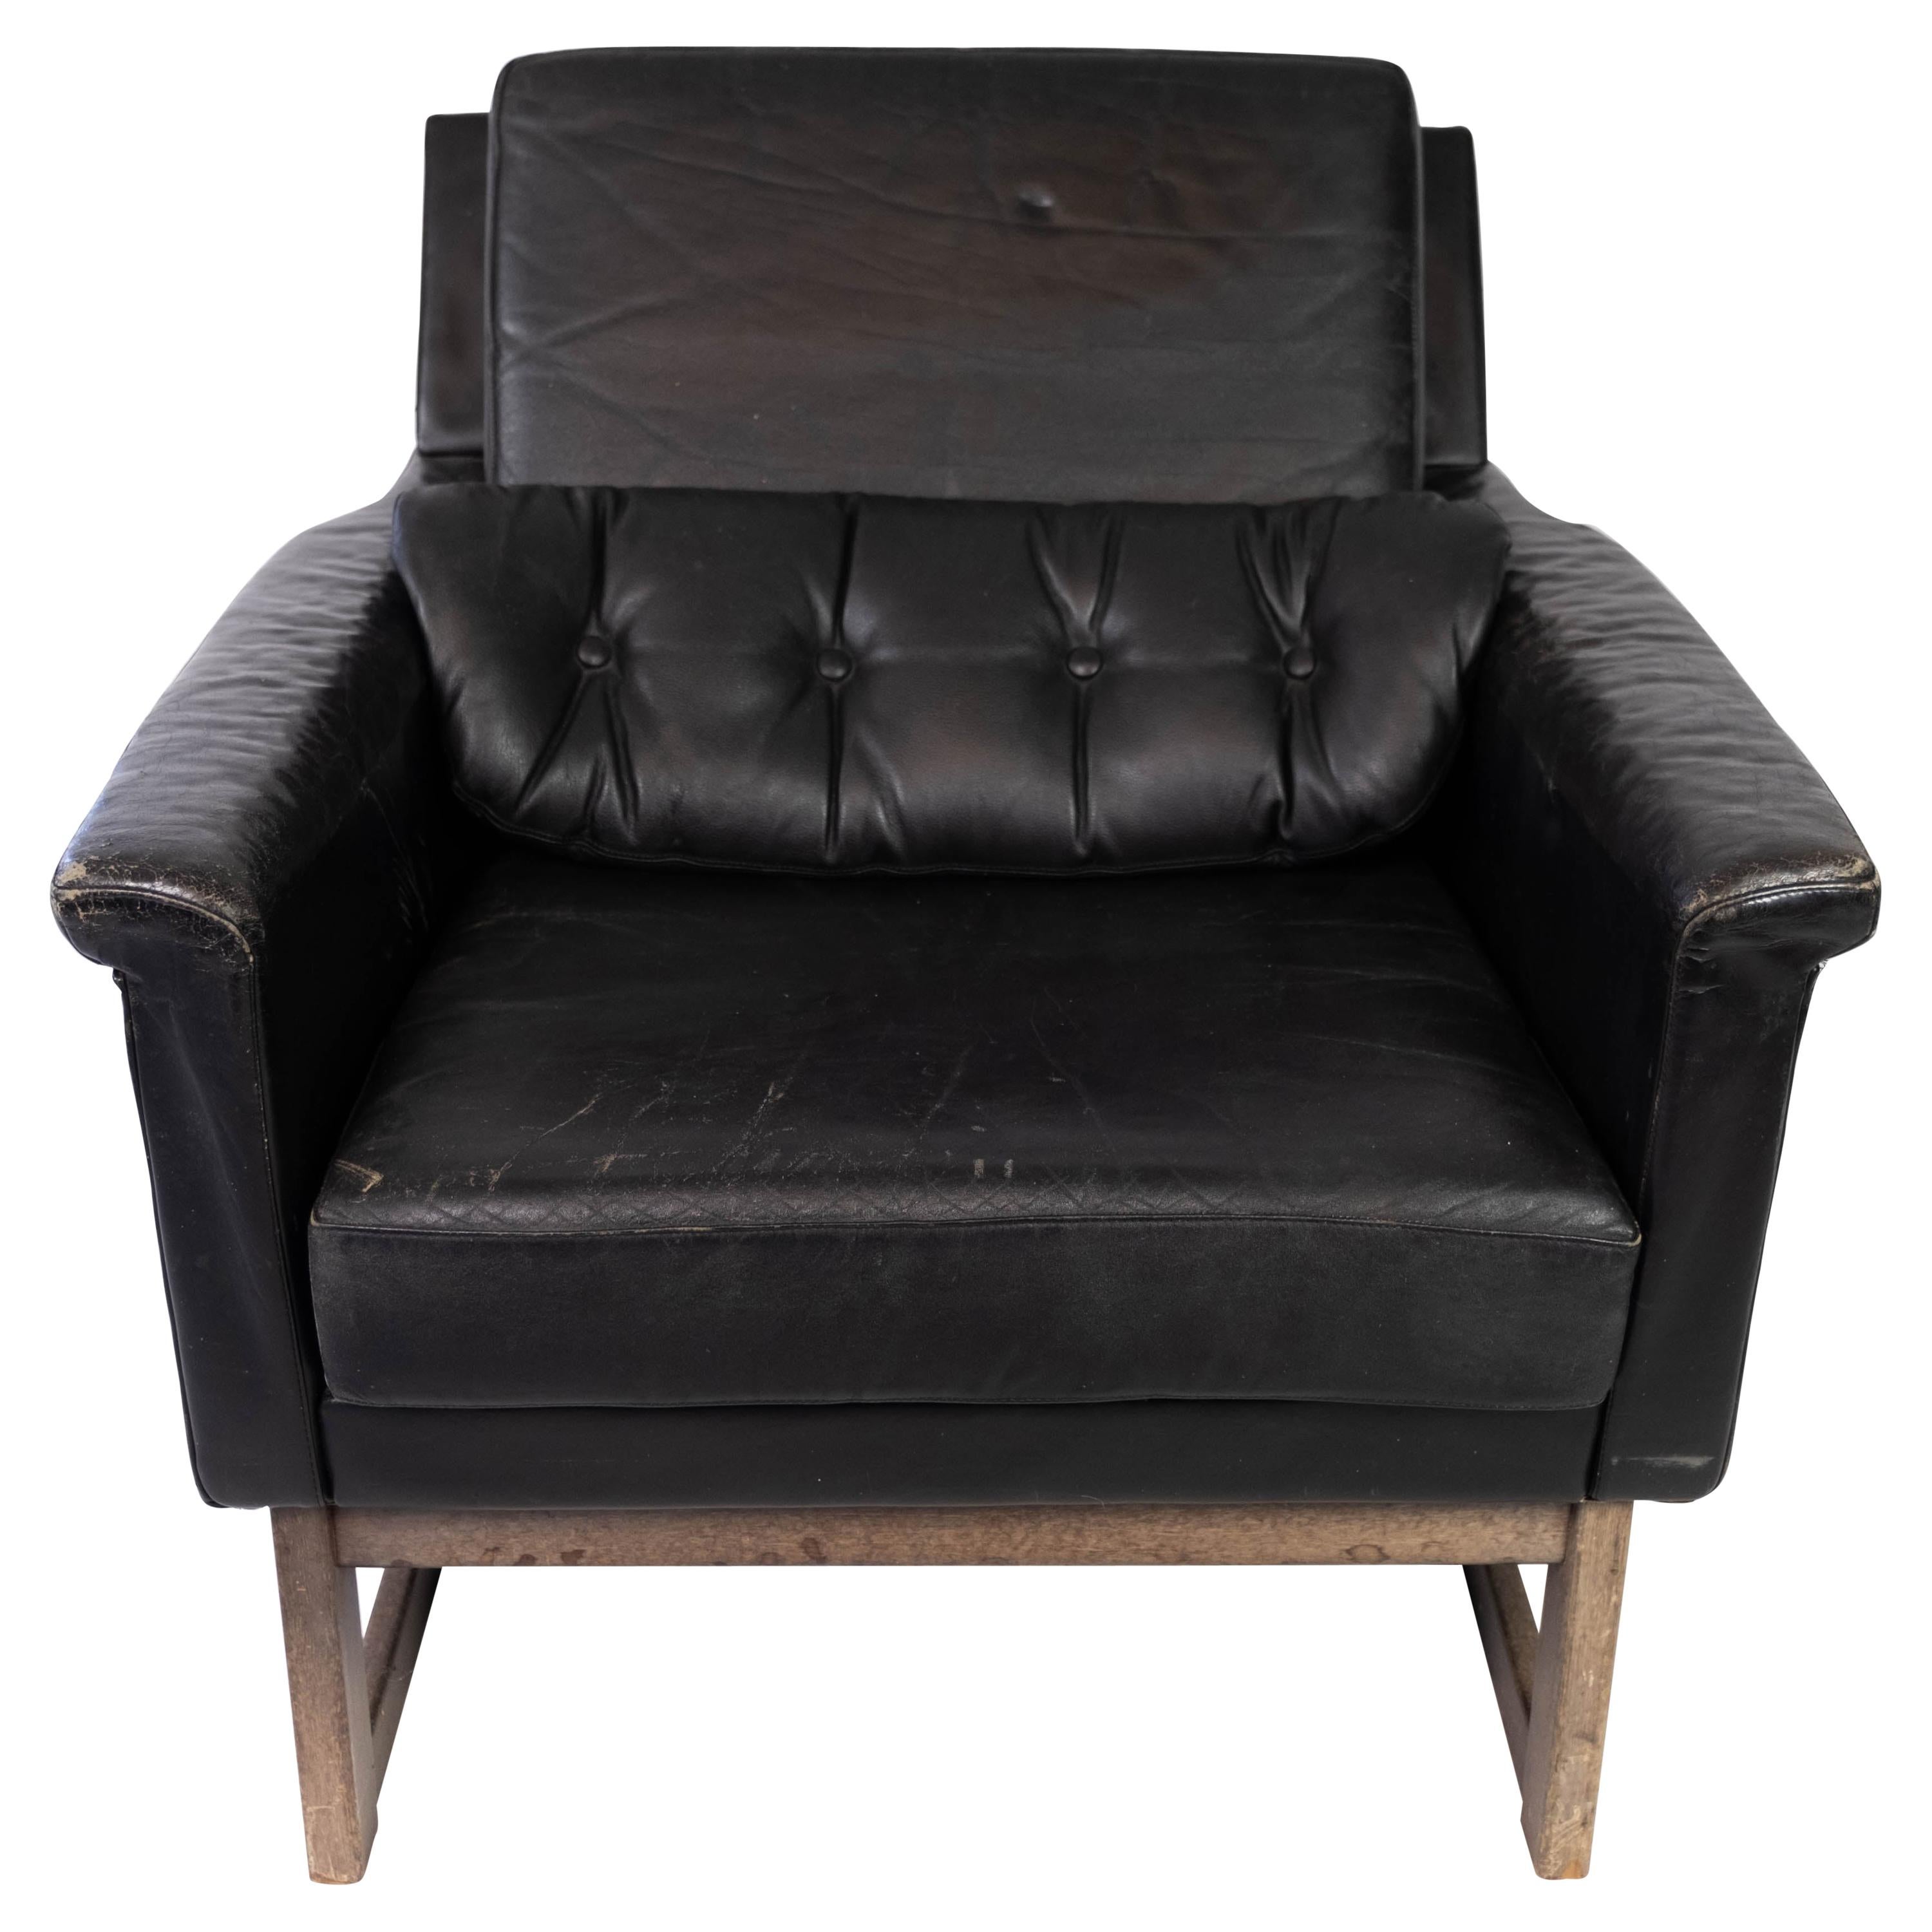 Easy Chair Upholstered with Black Leather and Legs in Wood, by Illum Wikkelsø